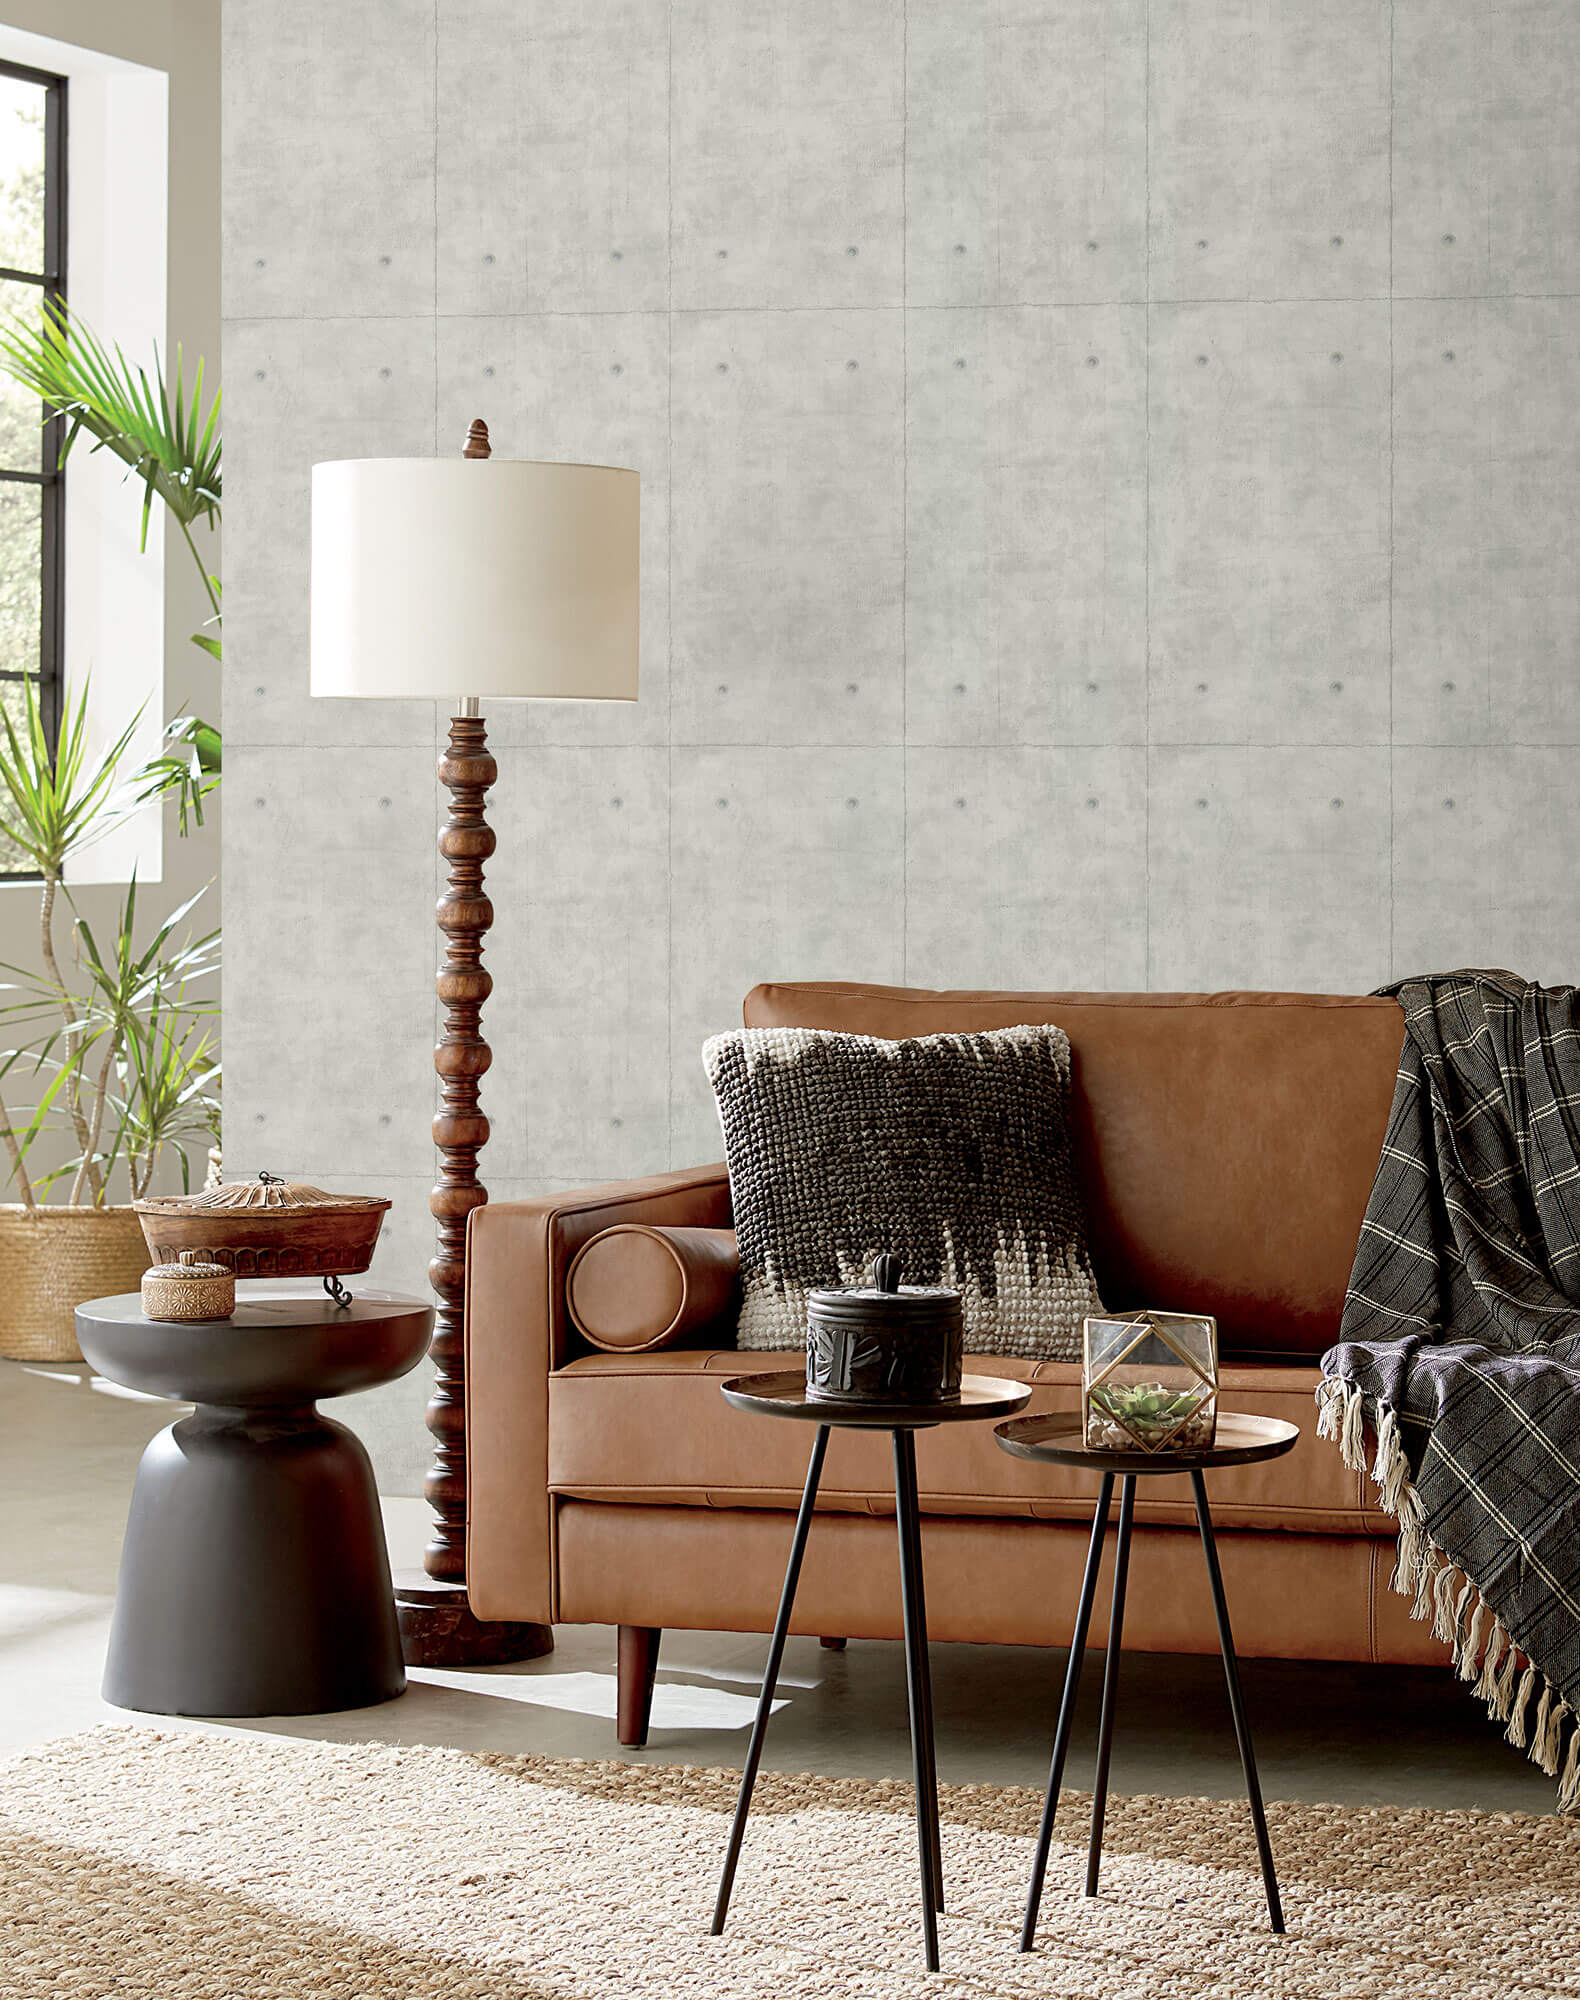 Buy Removable Concrete Look Wallpaper Selfadhesive Modern Online in India   Etsy